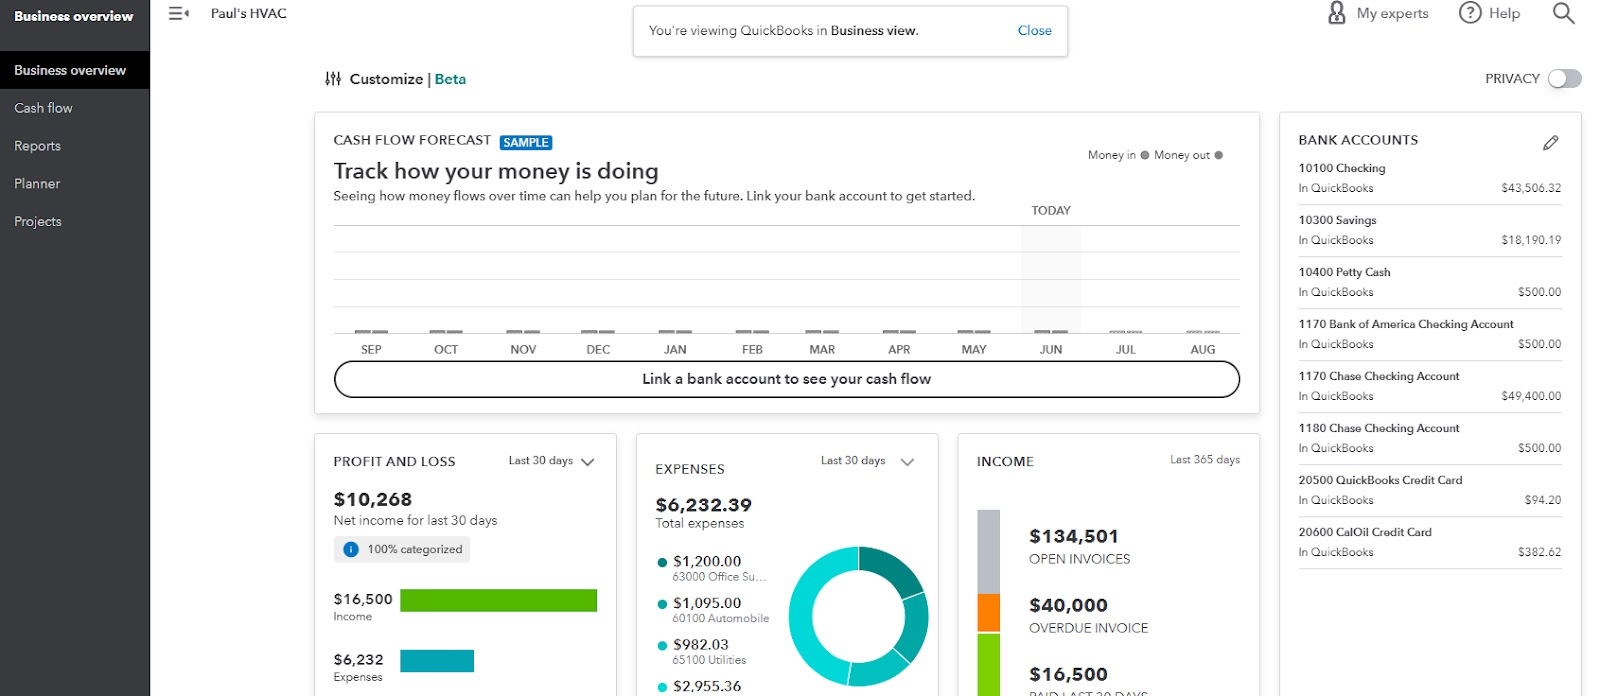 Image of QuickBooks Online dashboard in business view.